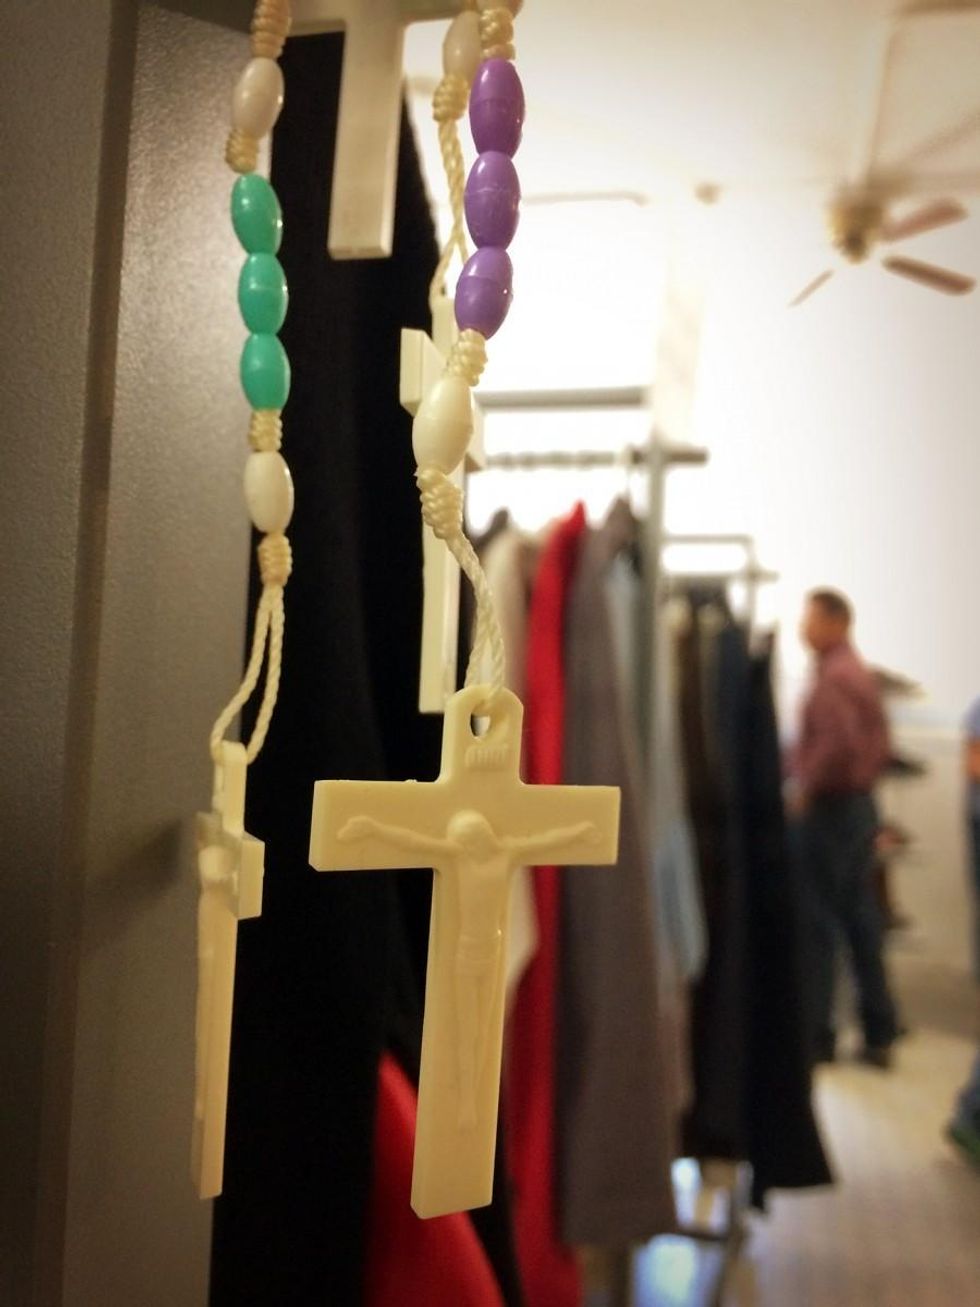 Rosaries are free for the taking in the clothing room, where asylum-seekers browse for well-fitting clothes. (Photo: Rose Lambert-Sluder)